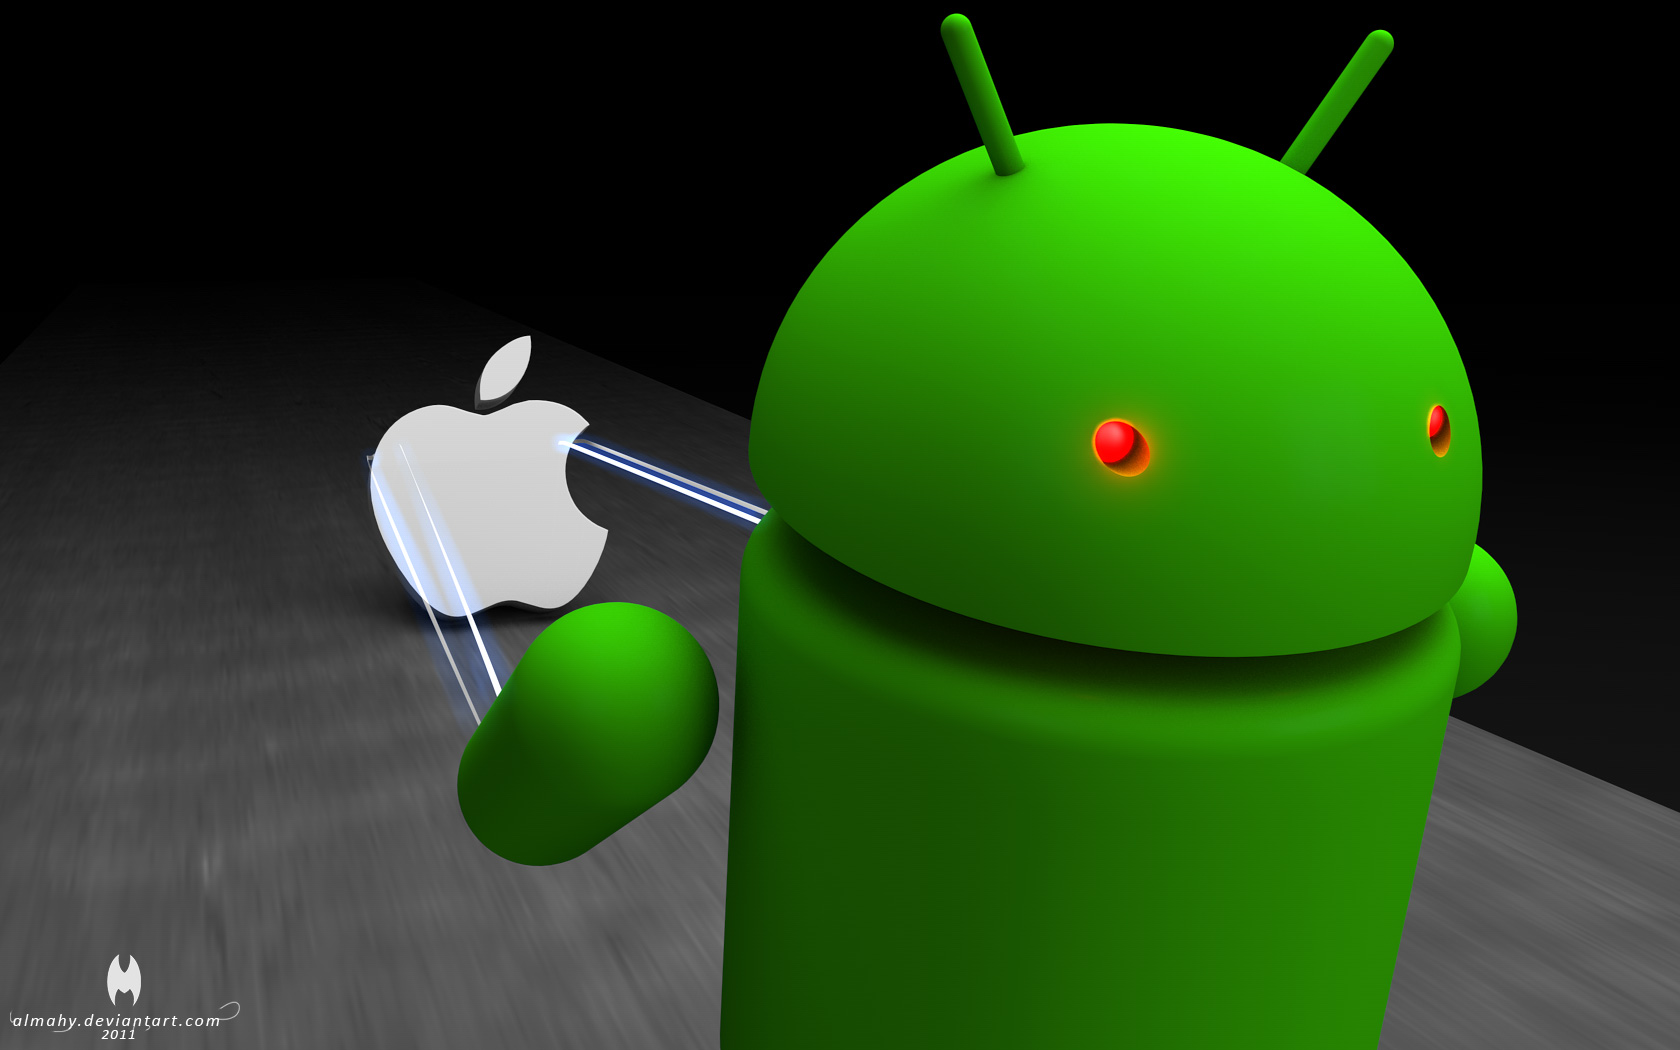 3D Android 2 by almahy on DeviantArt